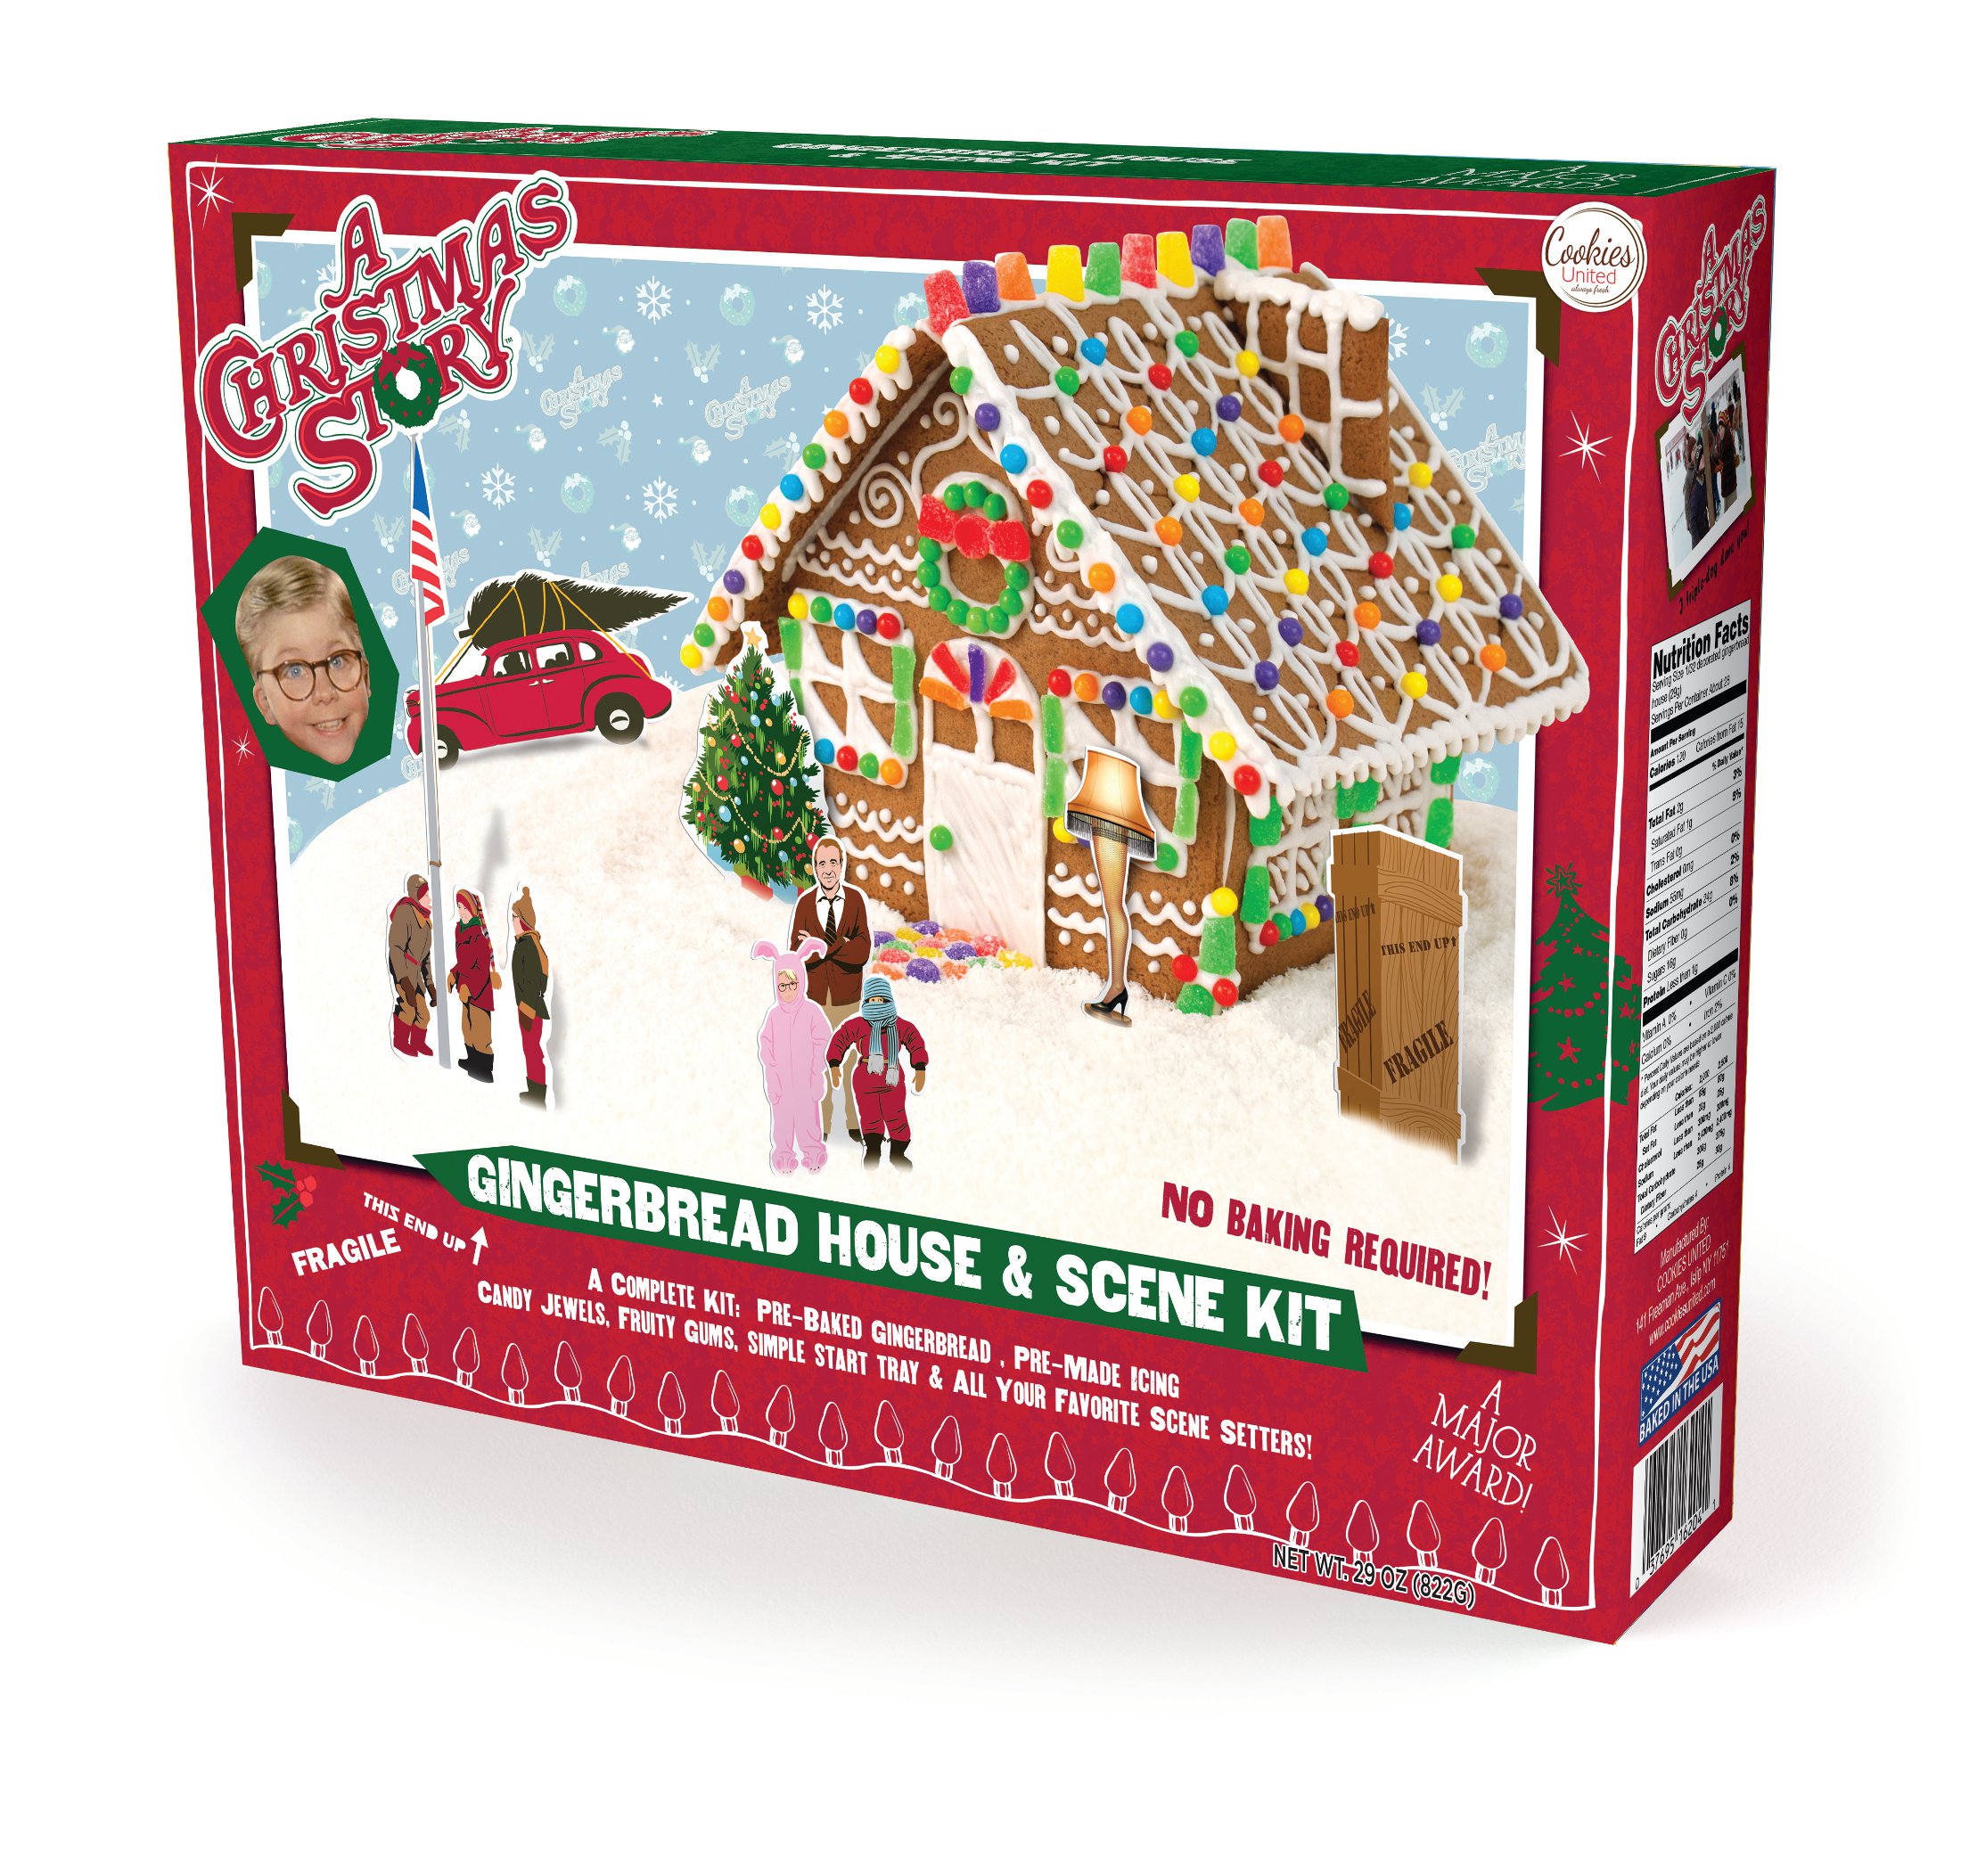 CookiesUnitedAChristmasStoryGingerbreadHouse Celebrate The Holiday Season With Gifts From WB